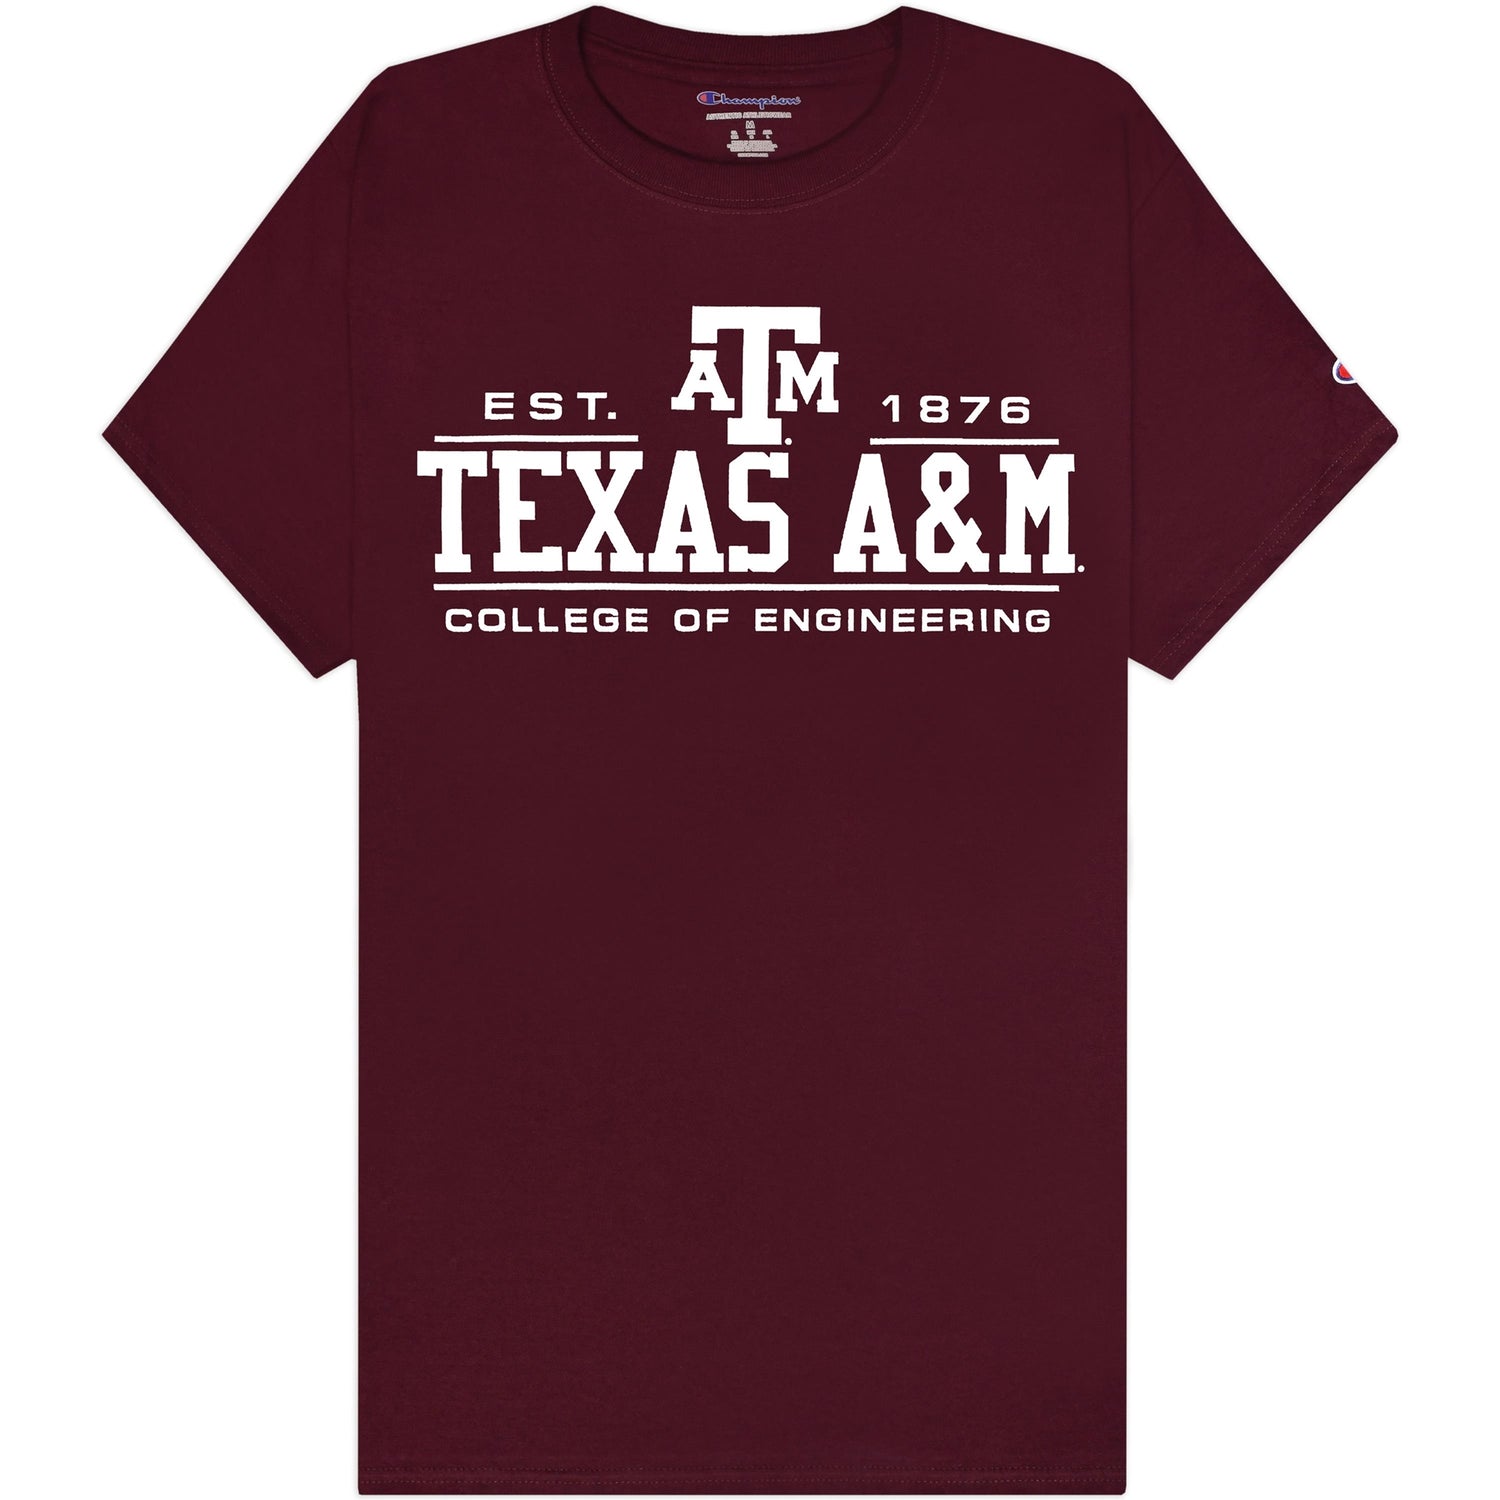 Texas A&M Champion College of Engineering T-Shirt